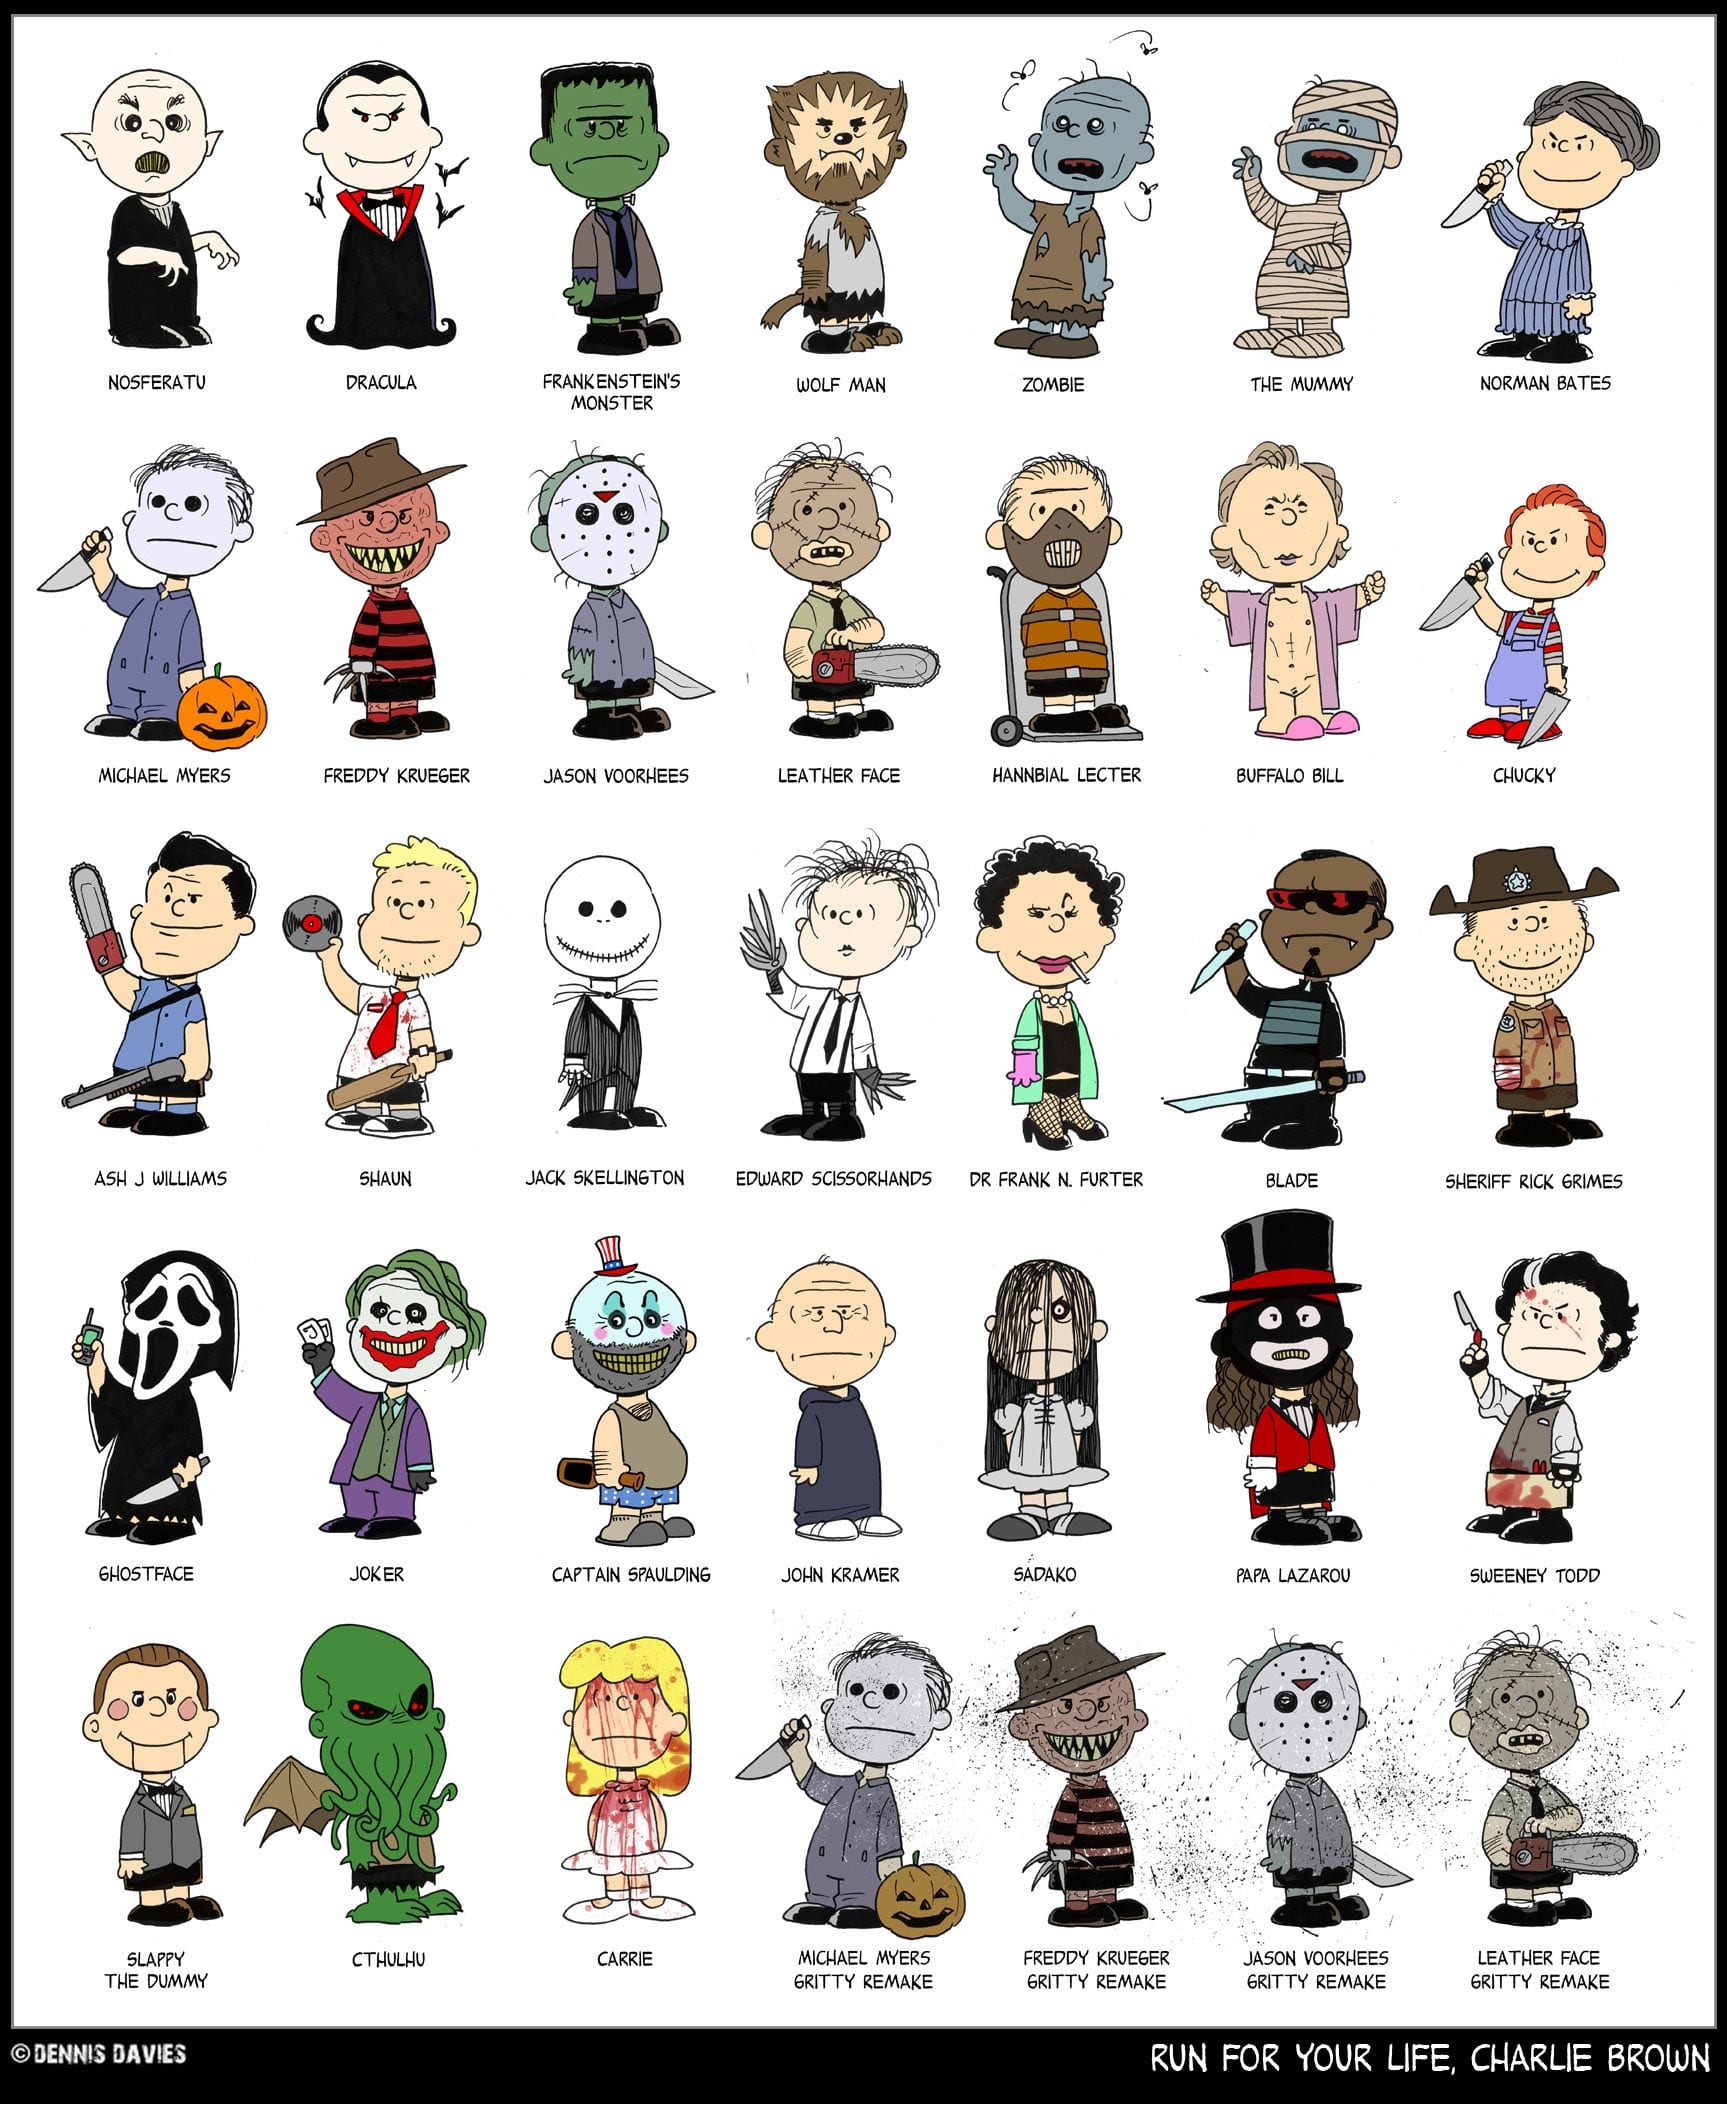 Horror Charlie Brown - Charakter-Illustrationen - seriesly AWESOME1727 x 2104